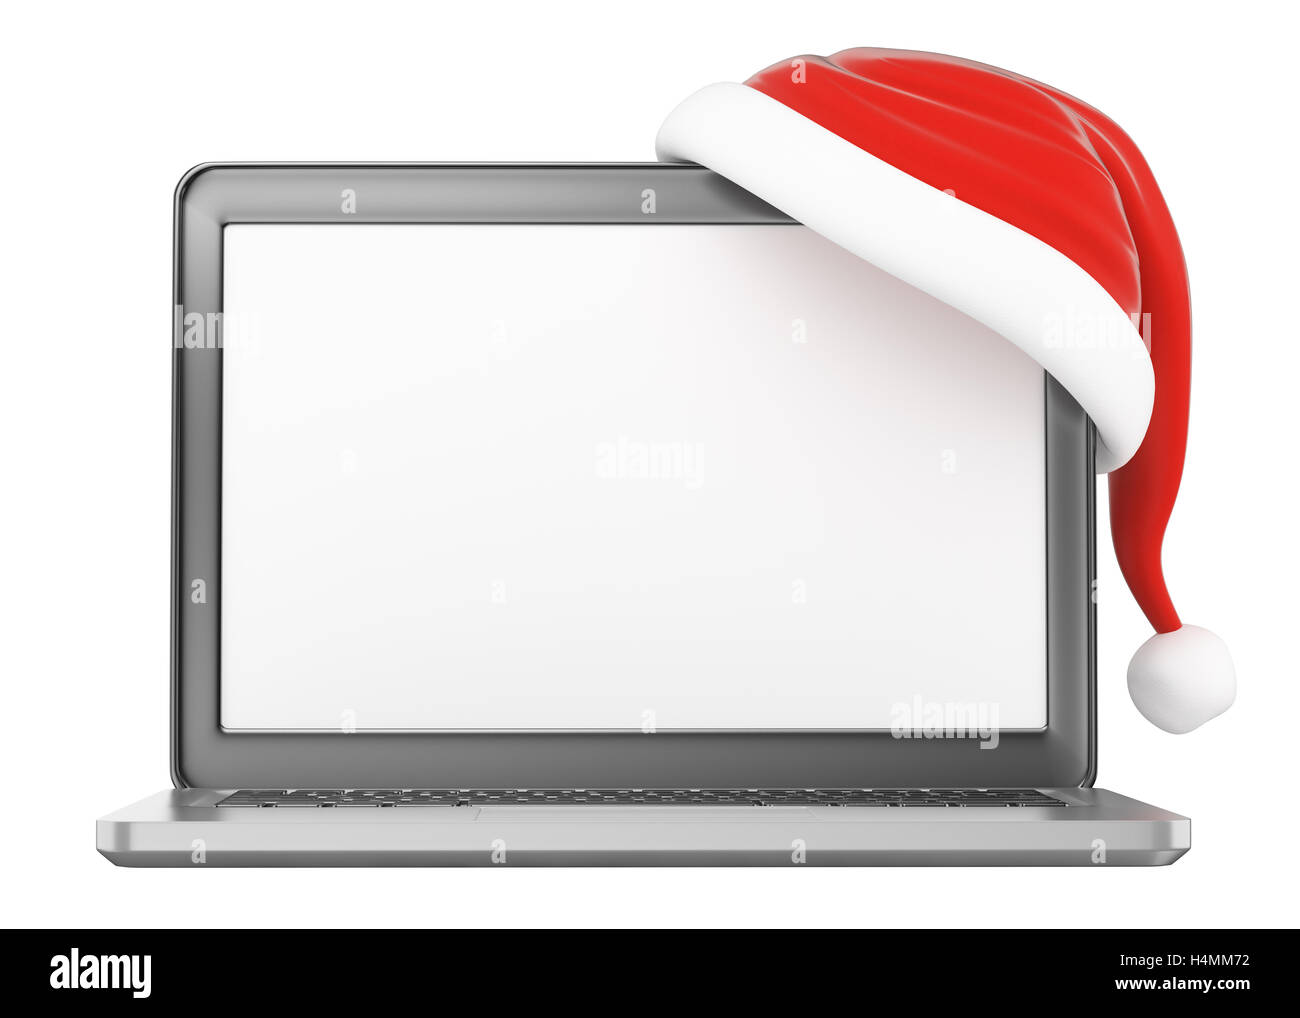 3d christmas illustration. Laptop with blank screen and Santa Claus hat. Isolated white background. Stock Photo